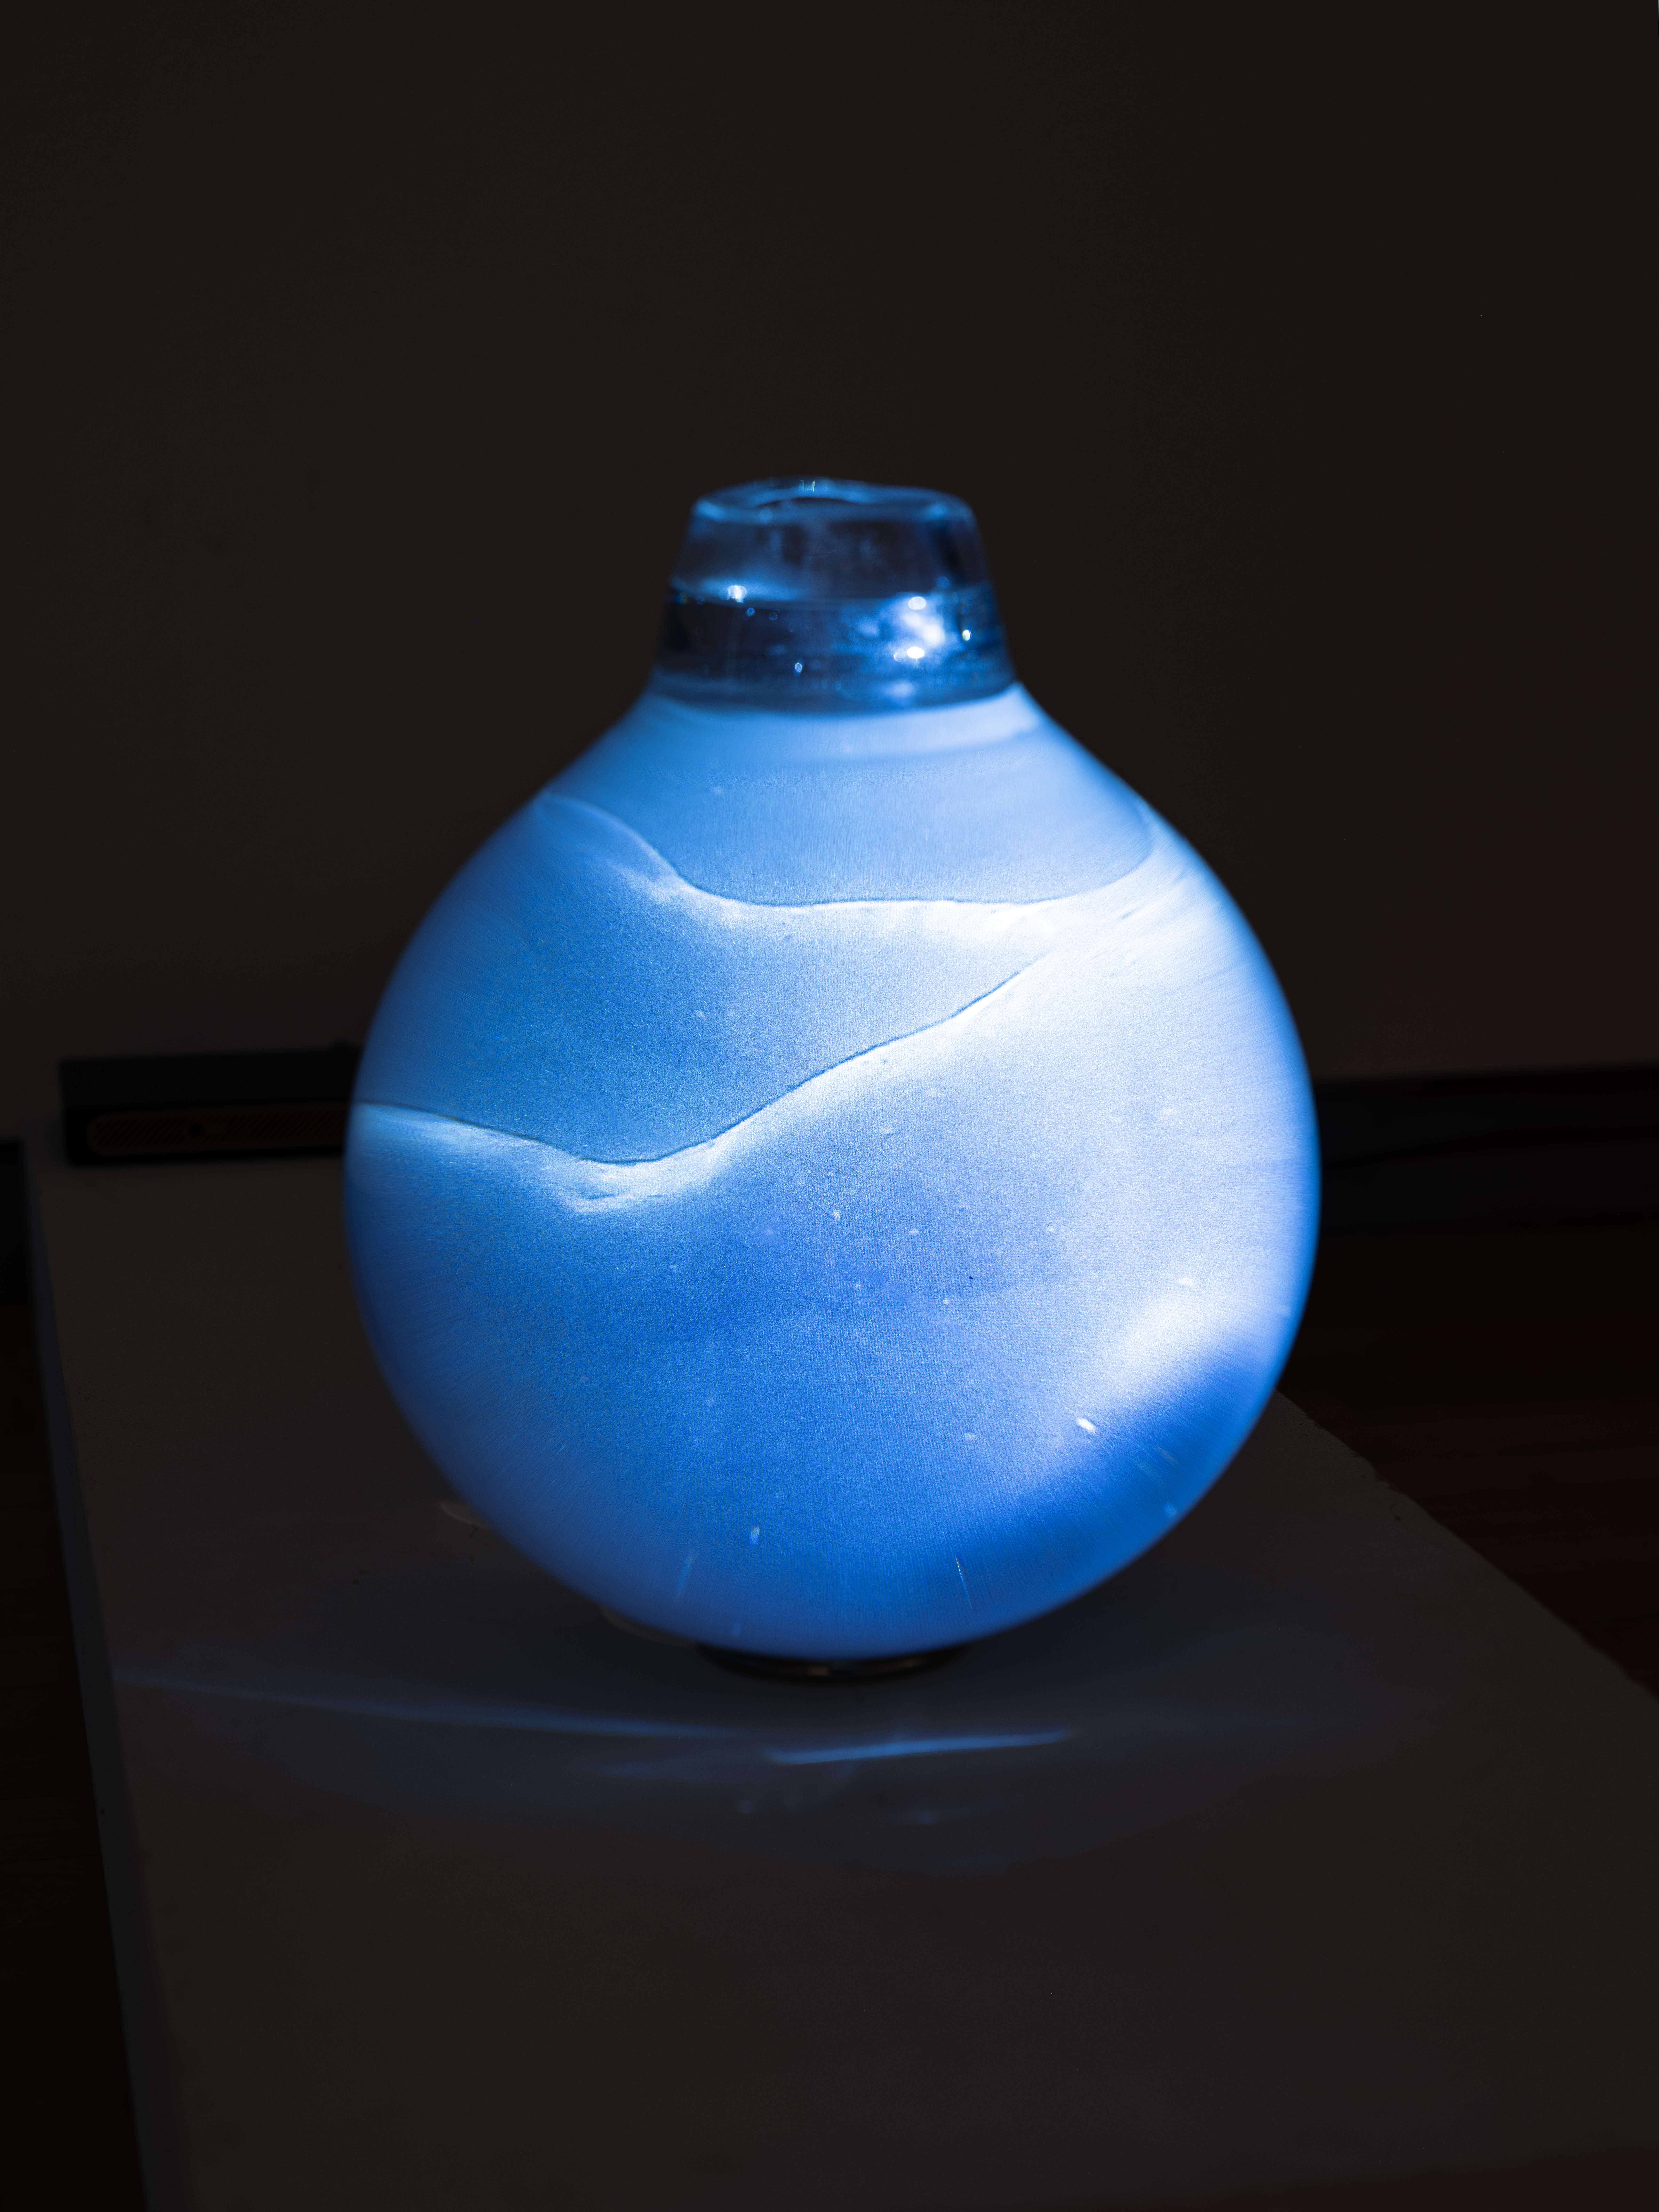 /Image%20of%20a%20glass%20orb%20with%20blue%20light%2C%20water%20and%20a%20blurry%20figure